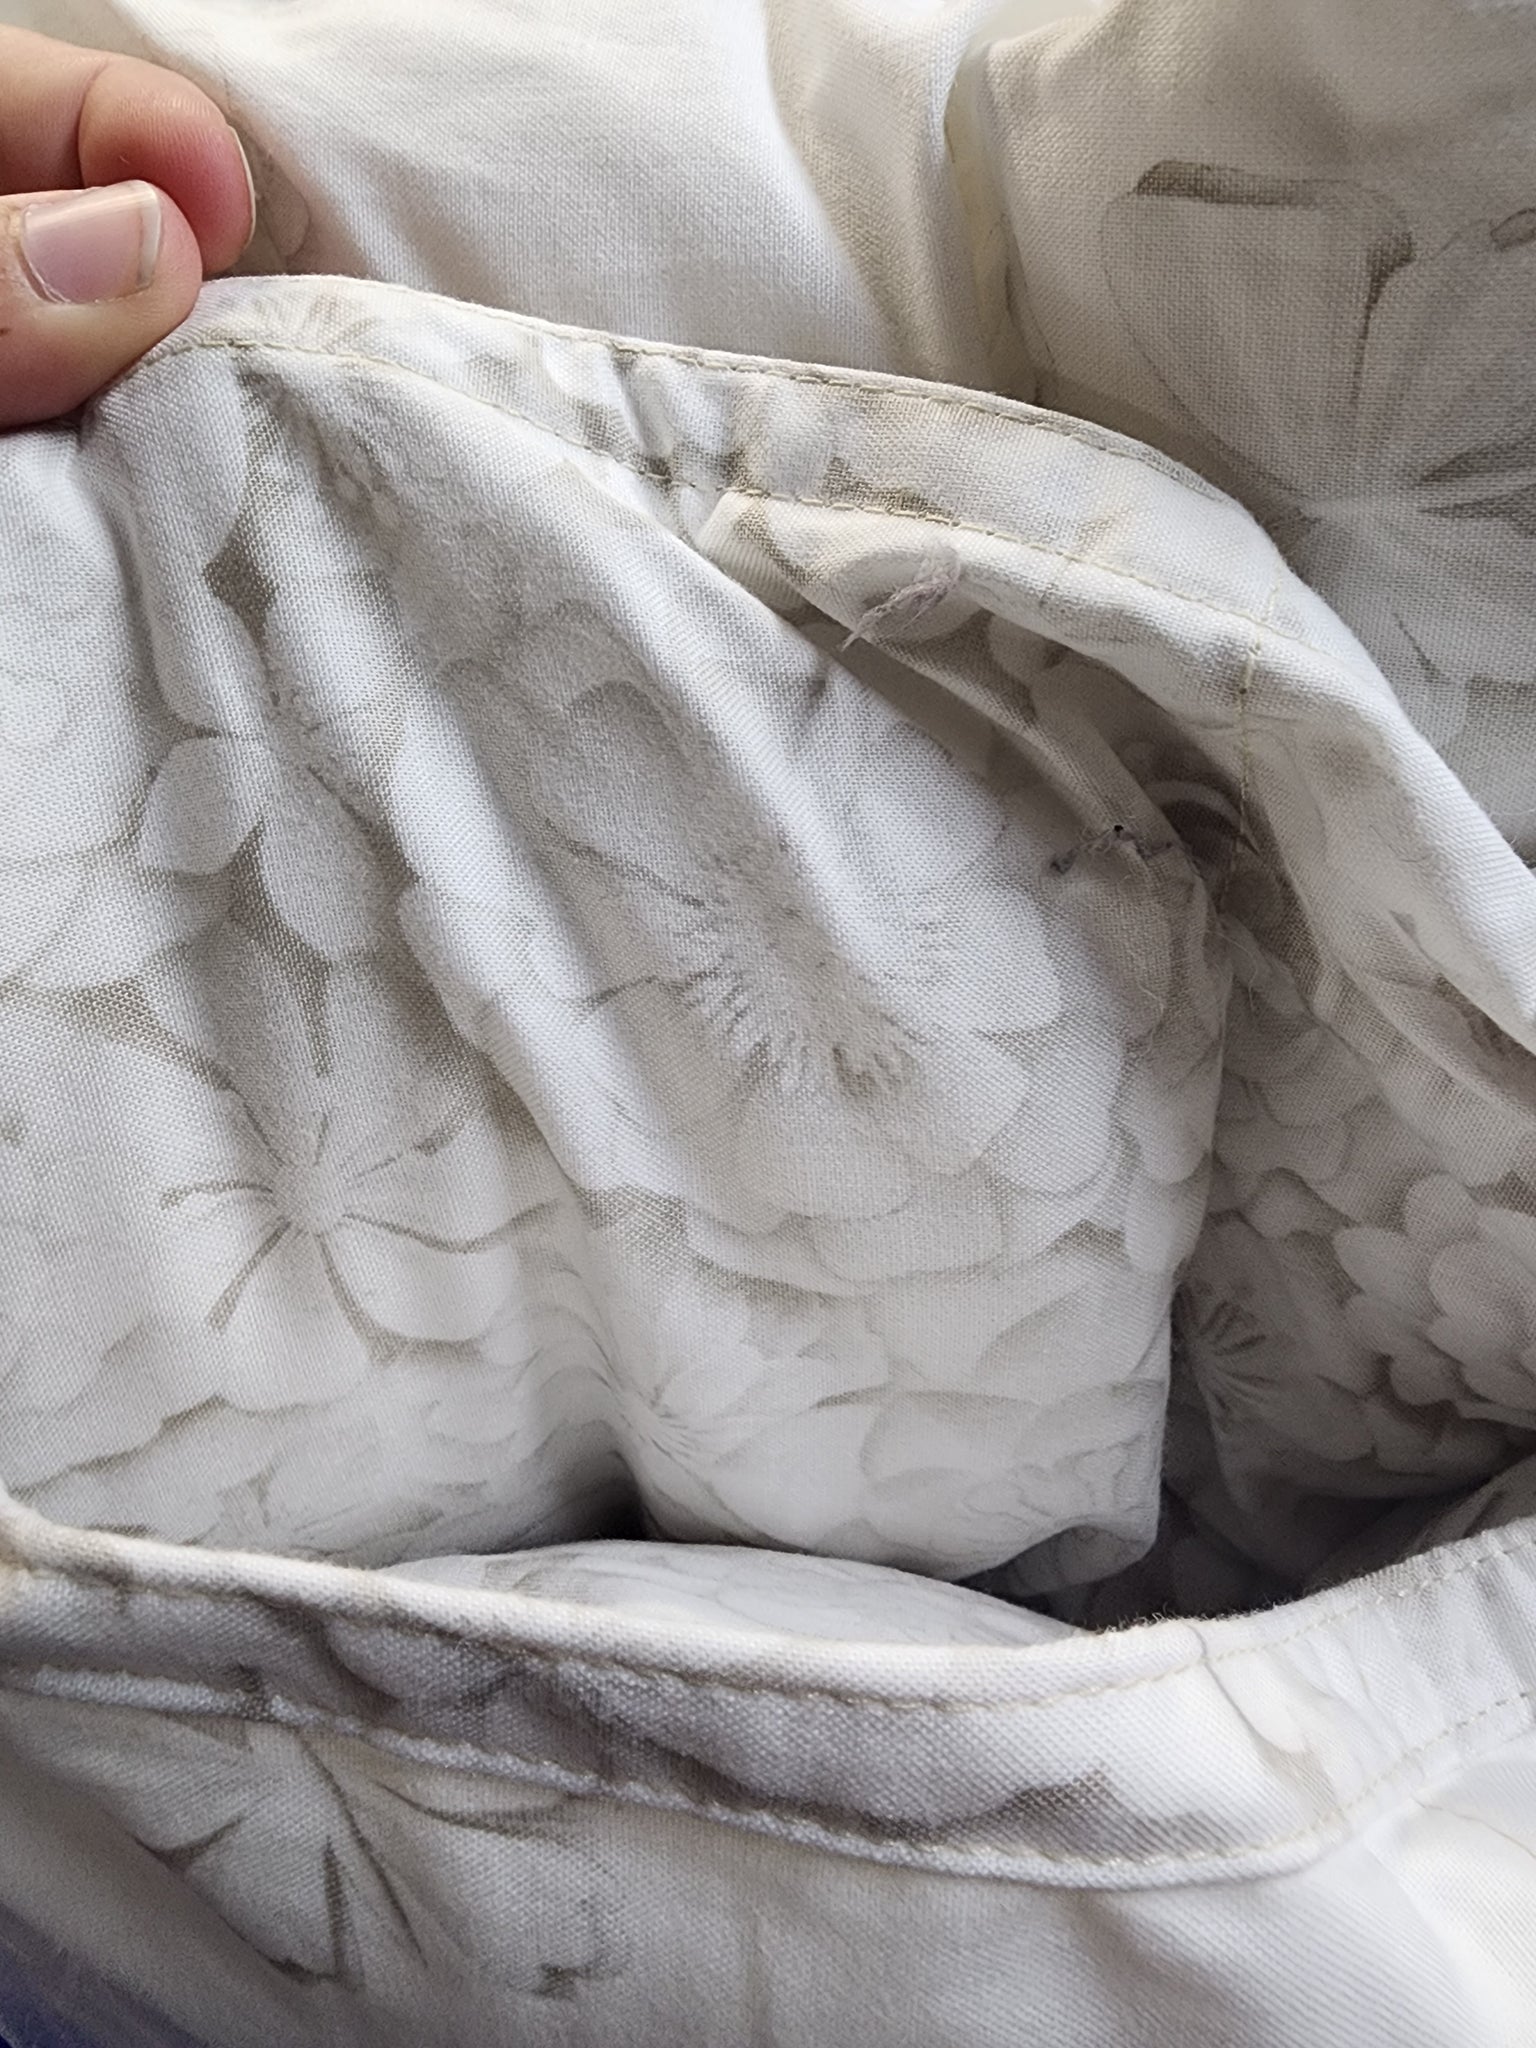 Clearance Weighted Blanket - Full 25 lb White/Gray Flowers (for 131-200 lb user)